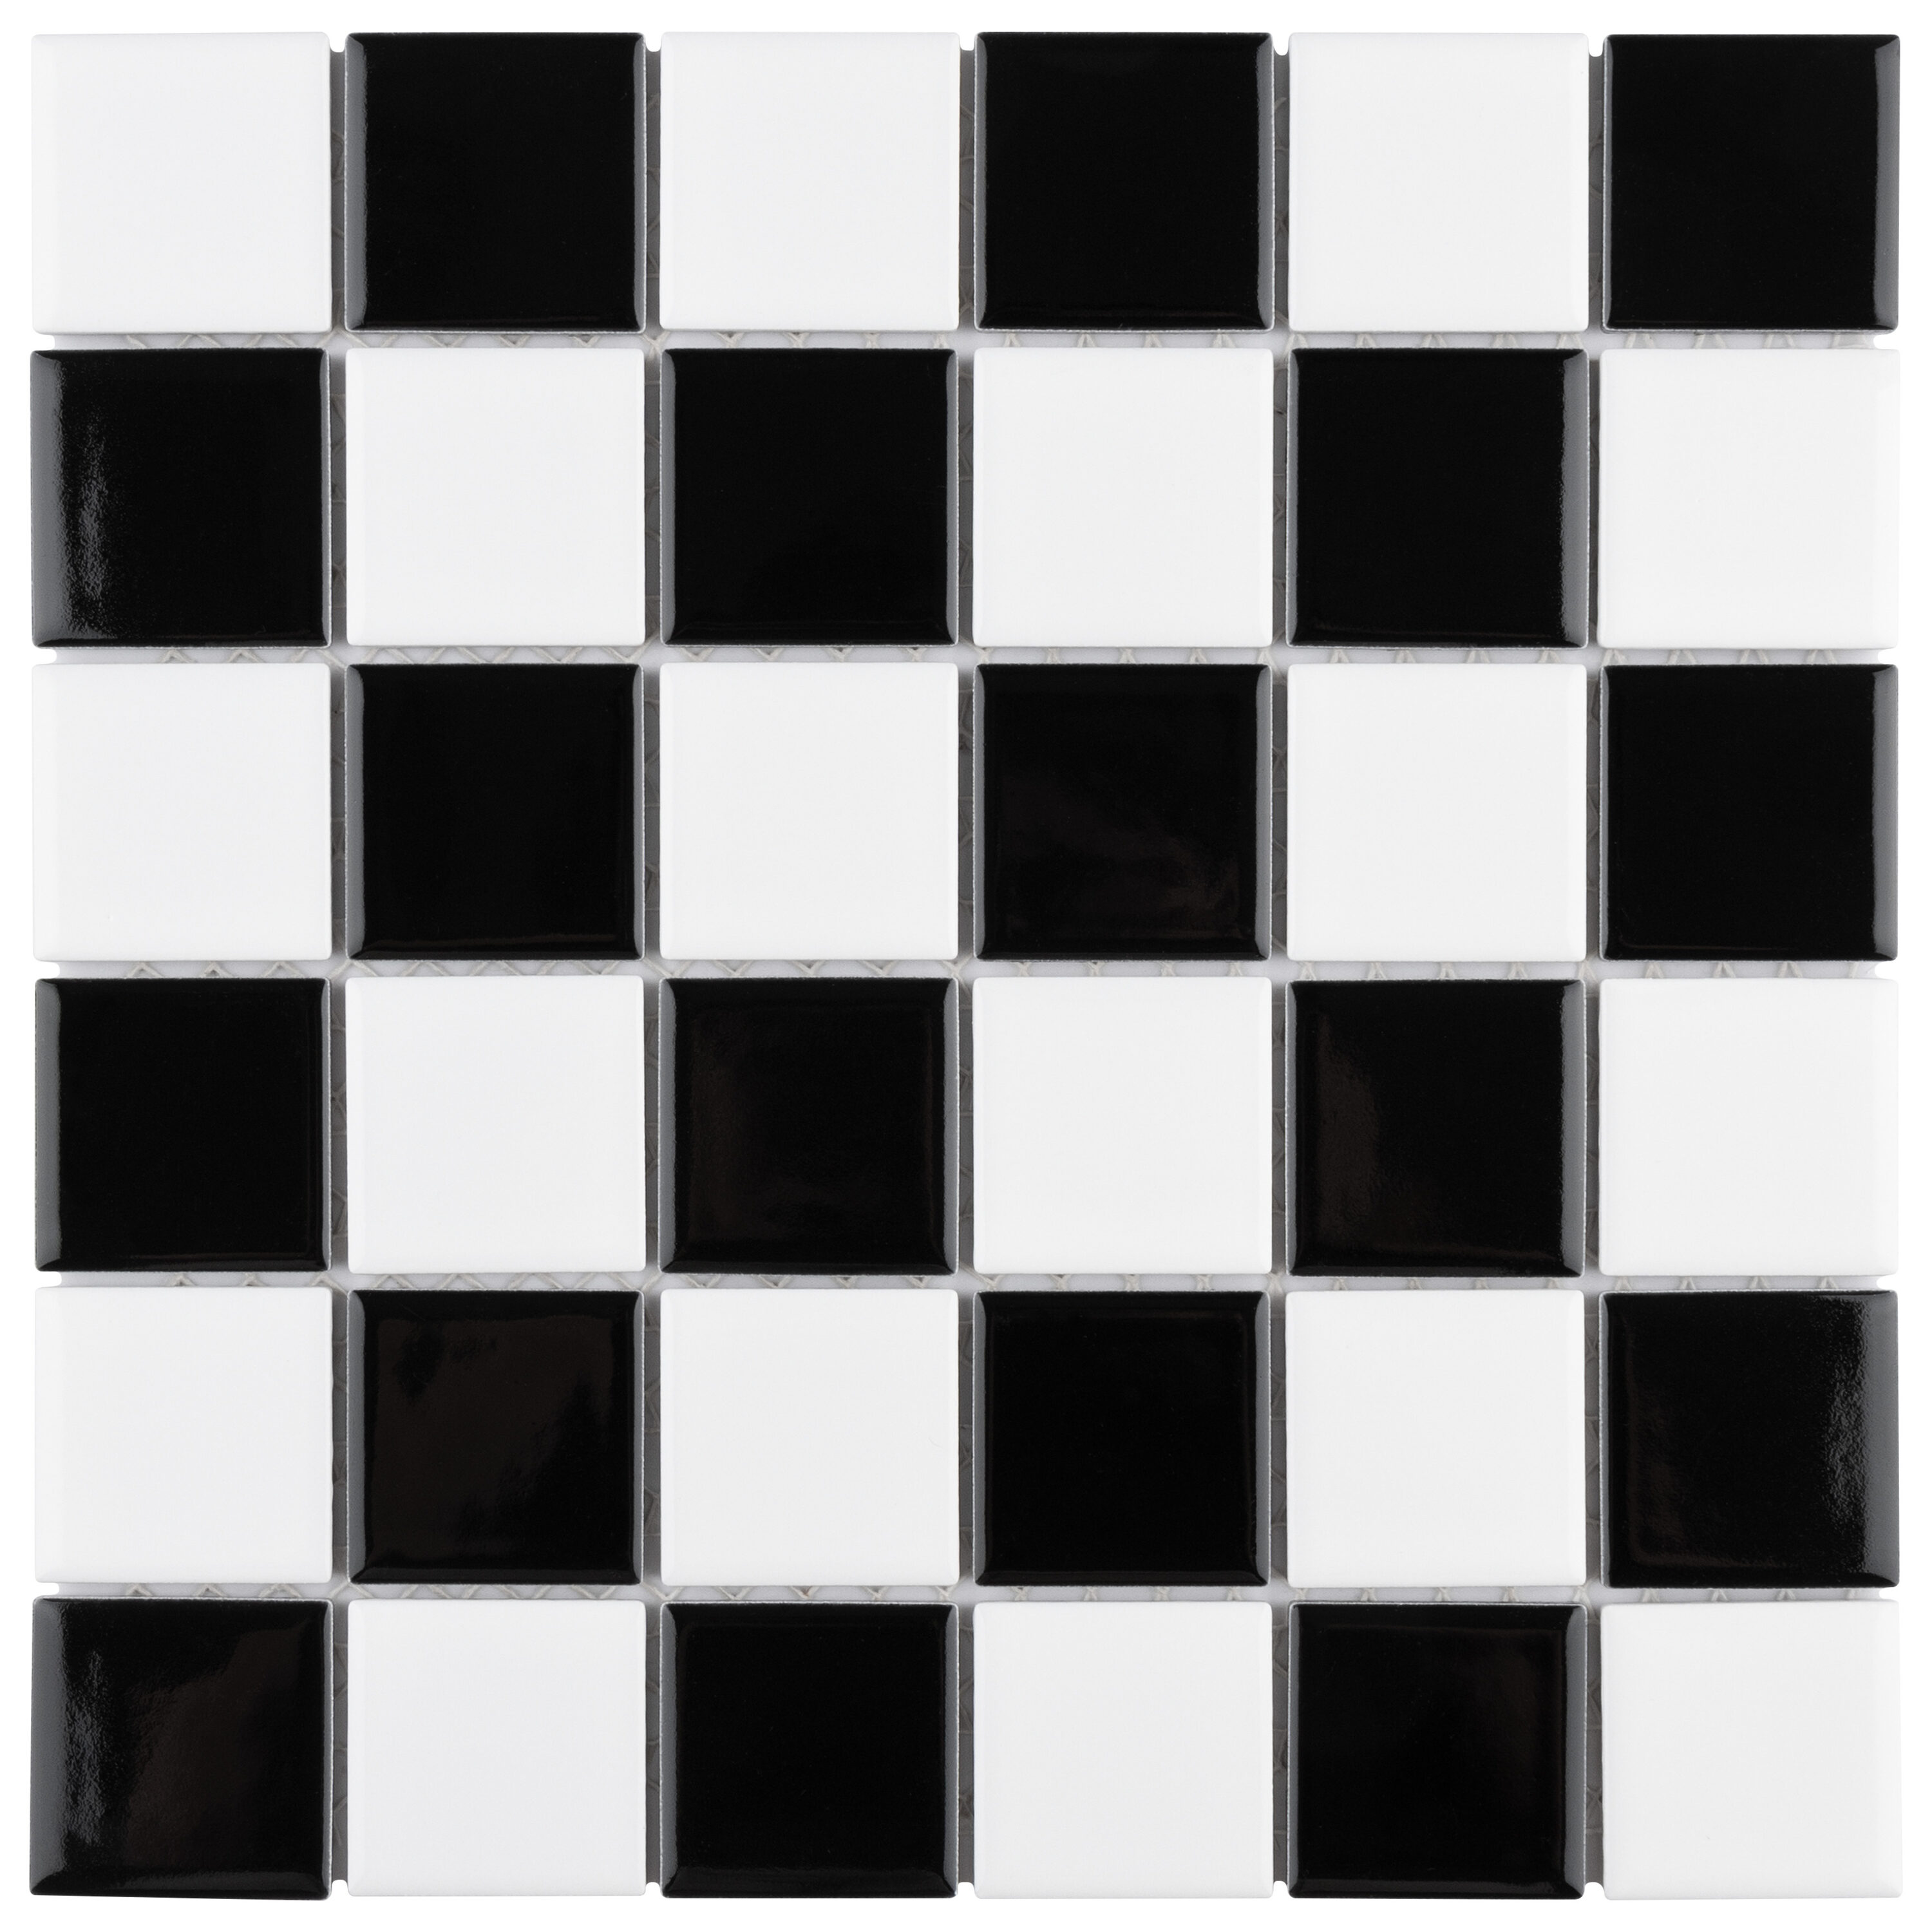 Checkerboard Pattern Art Photography - Kitchen Sink Hand Towel by